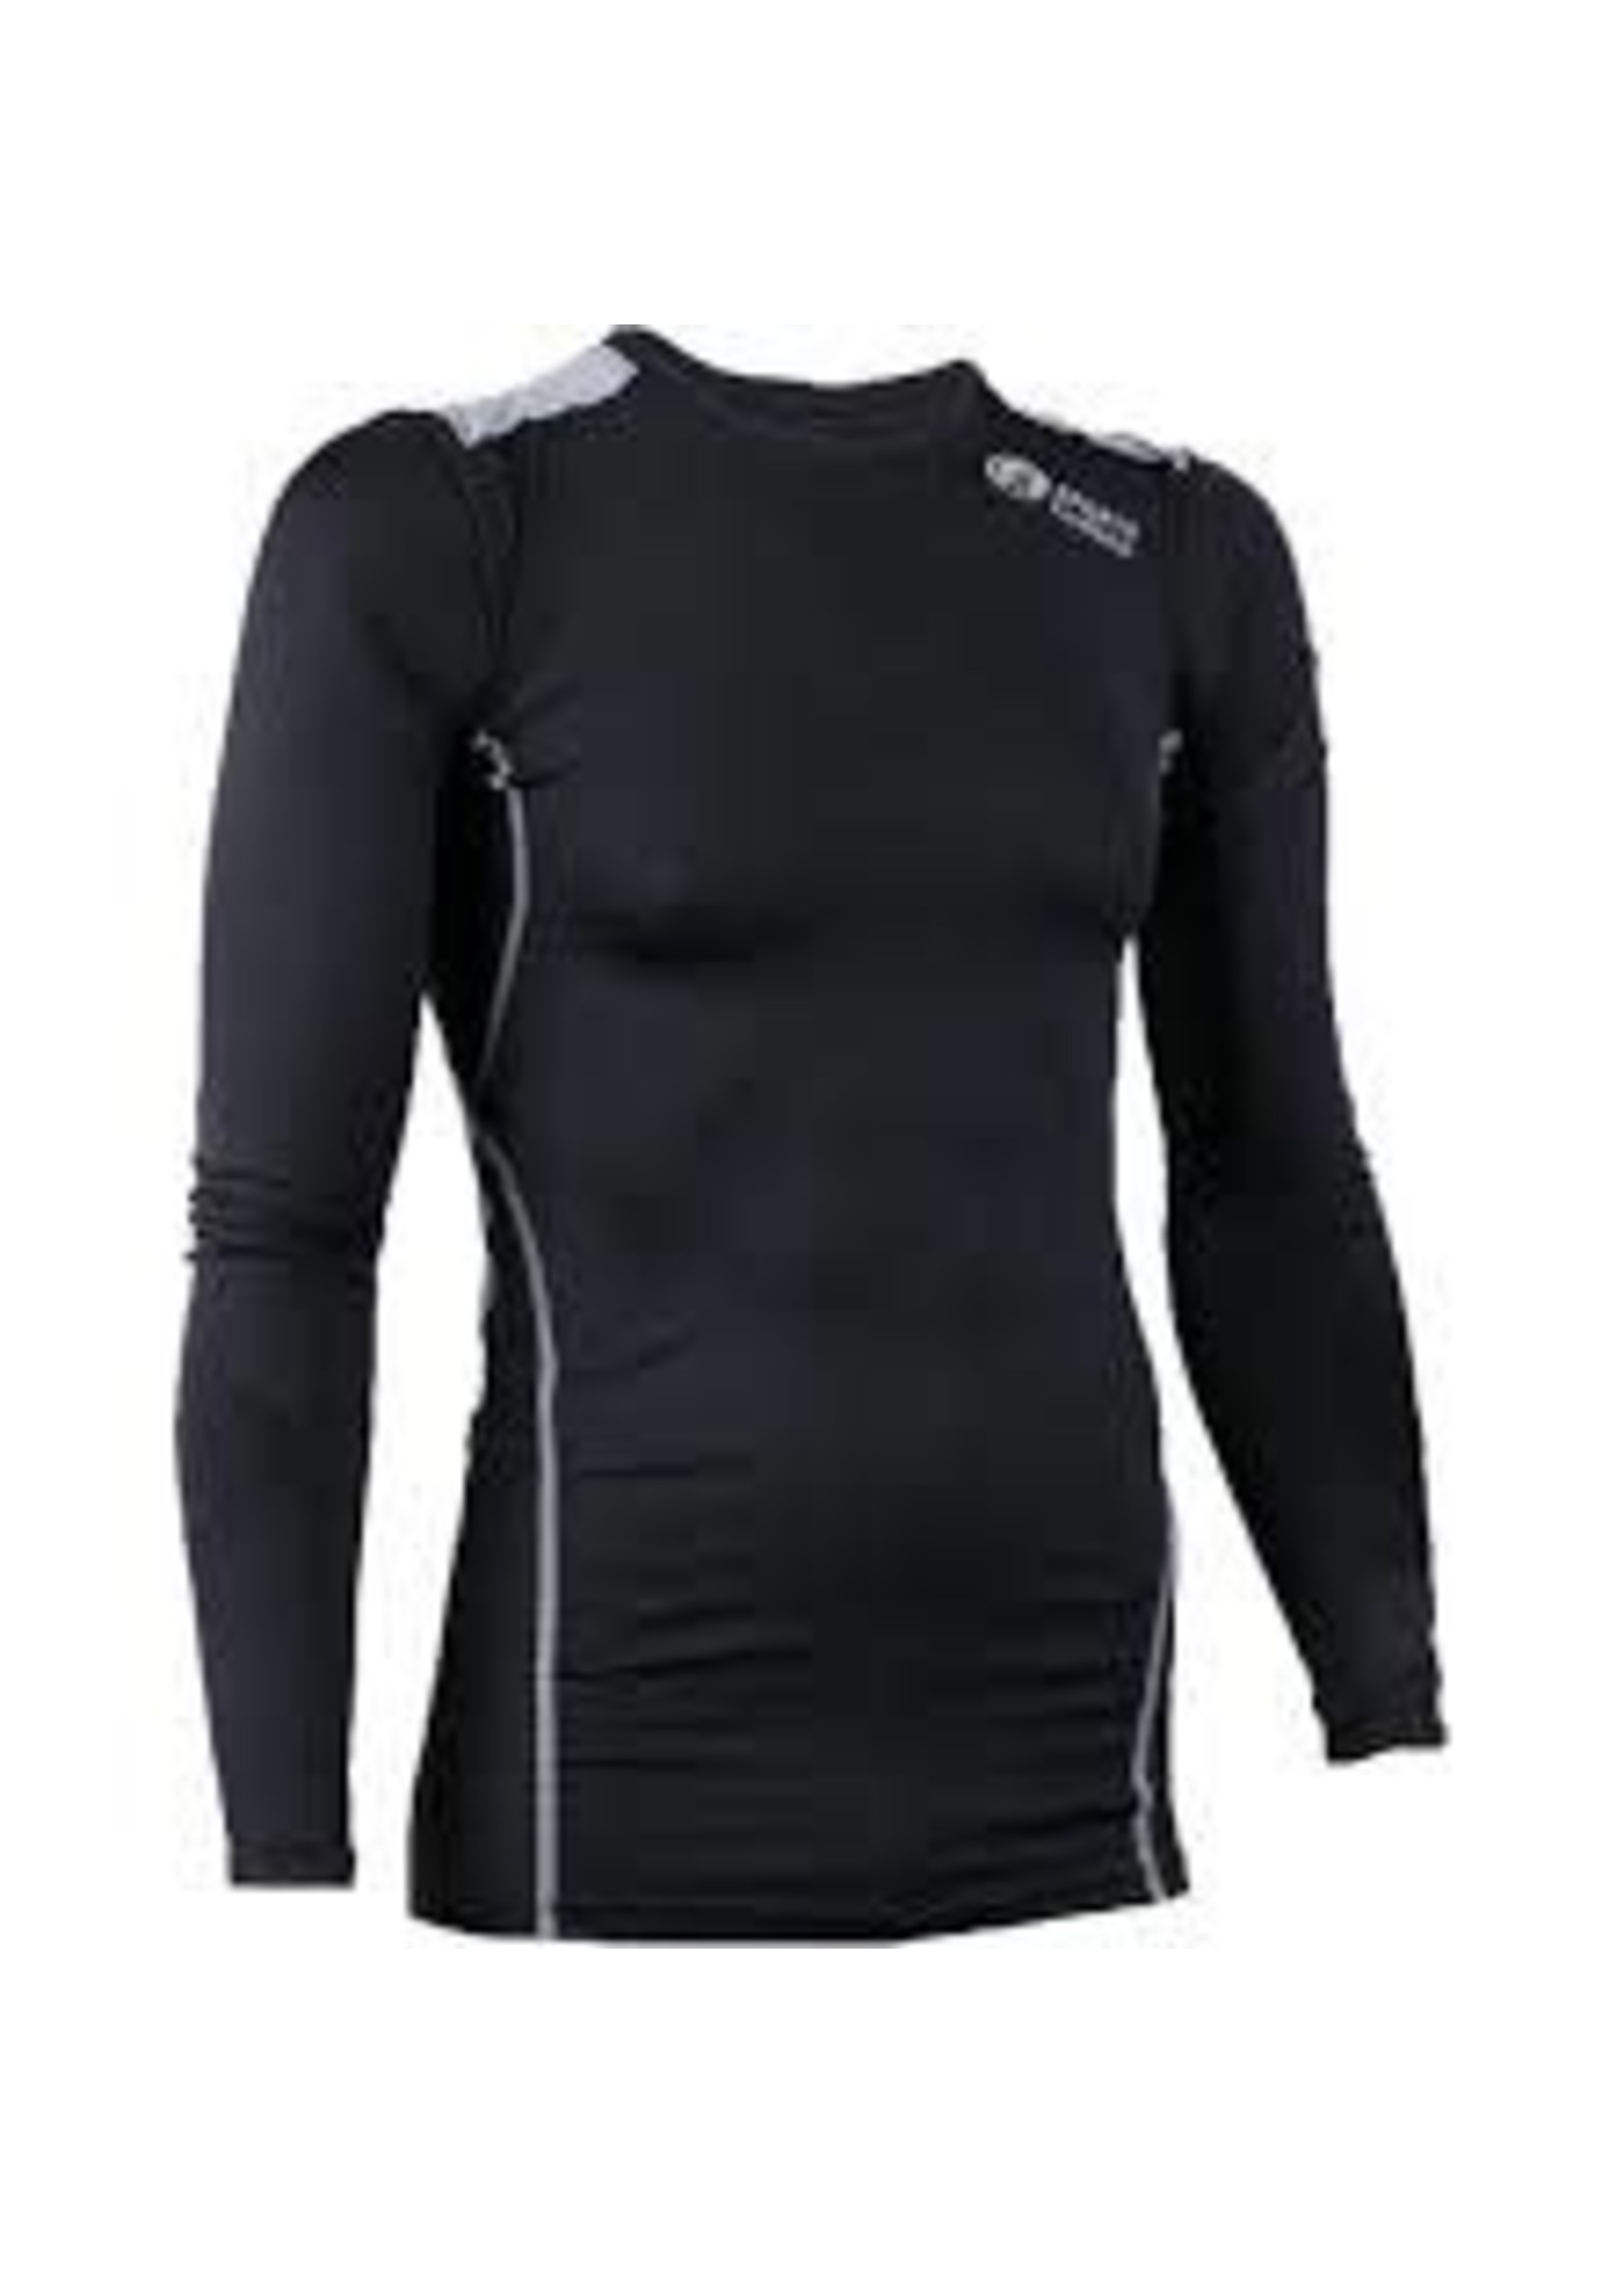 SPORT EXCELLENCE SPORTS EXCELLENCE COMPRESSION SHIRT SR